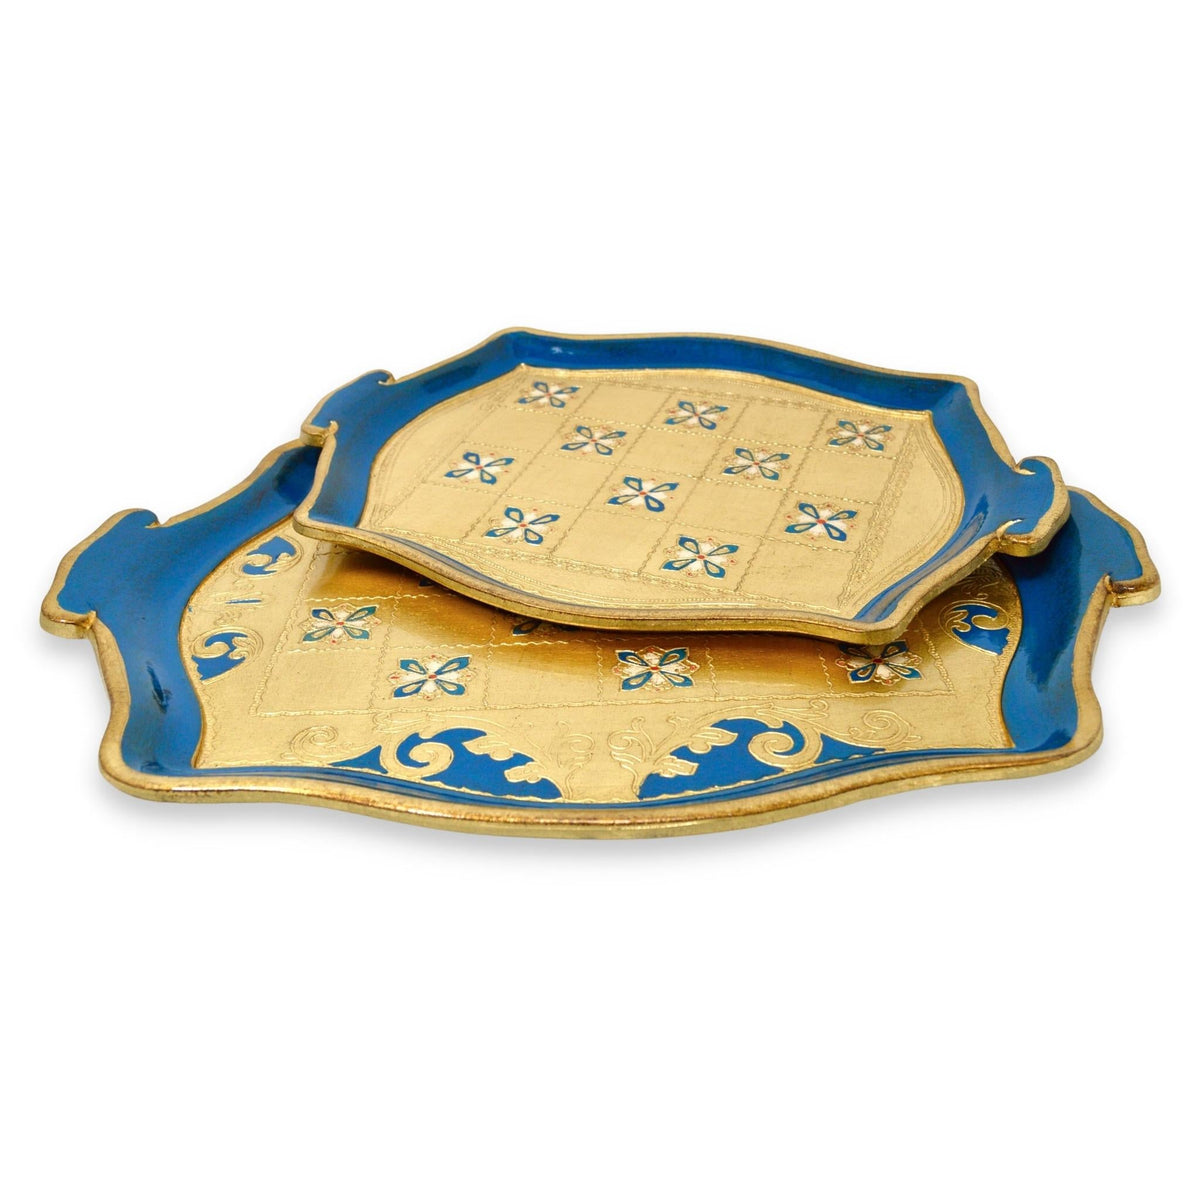 Florentine Carved Gilded Wood, Elegant Tray, Set of 2, Made in Italy - My Italian Decor